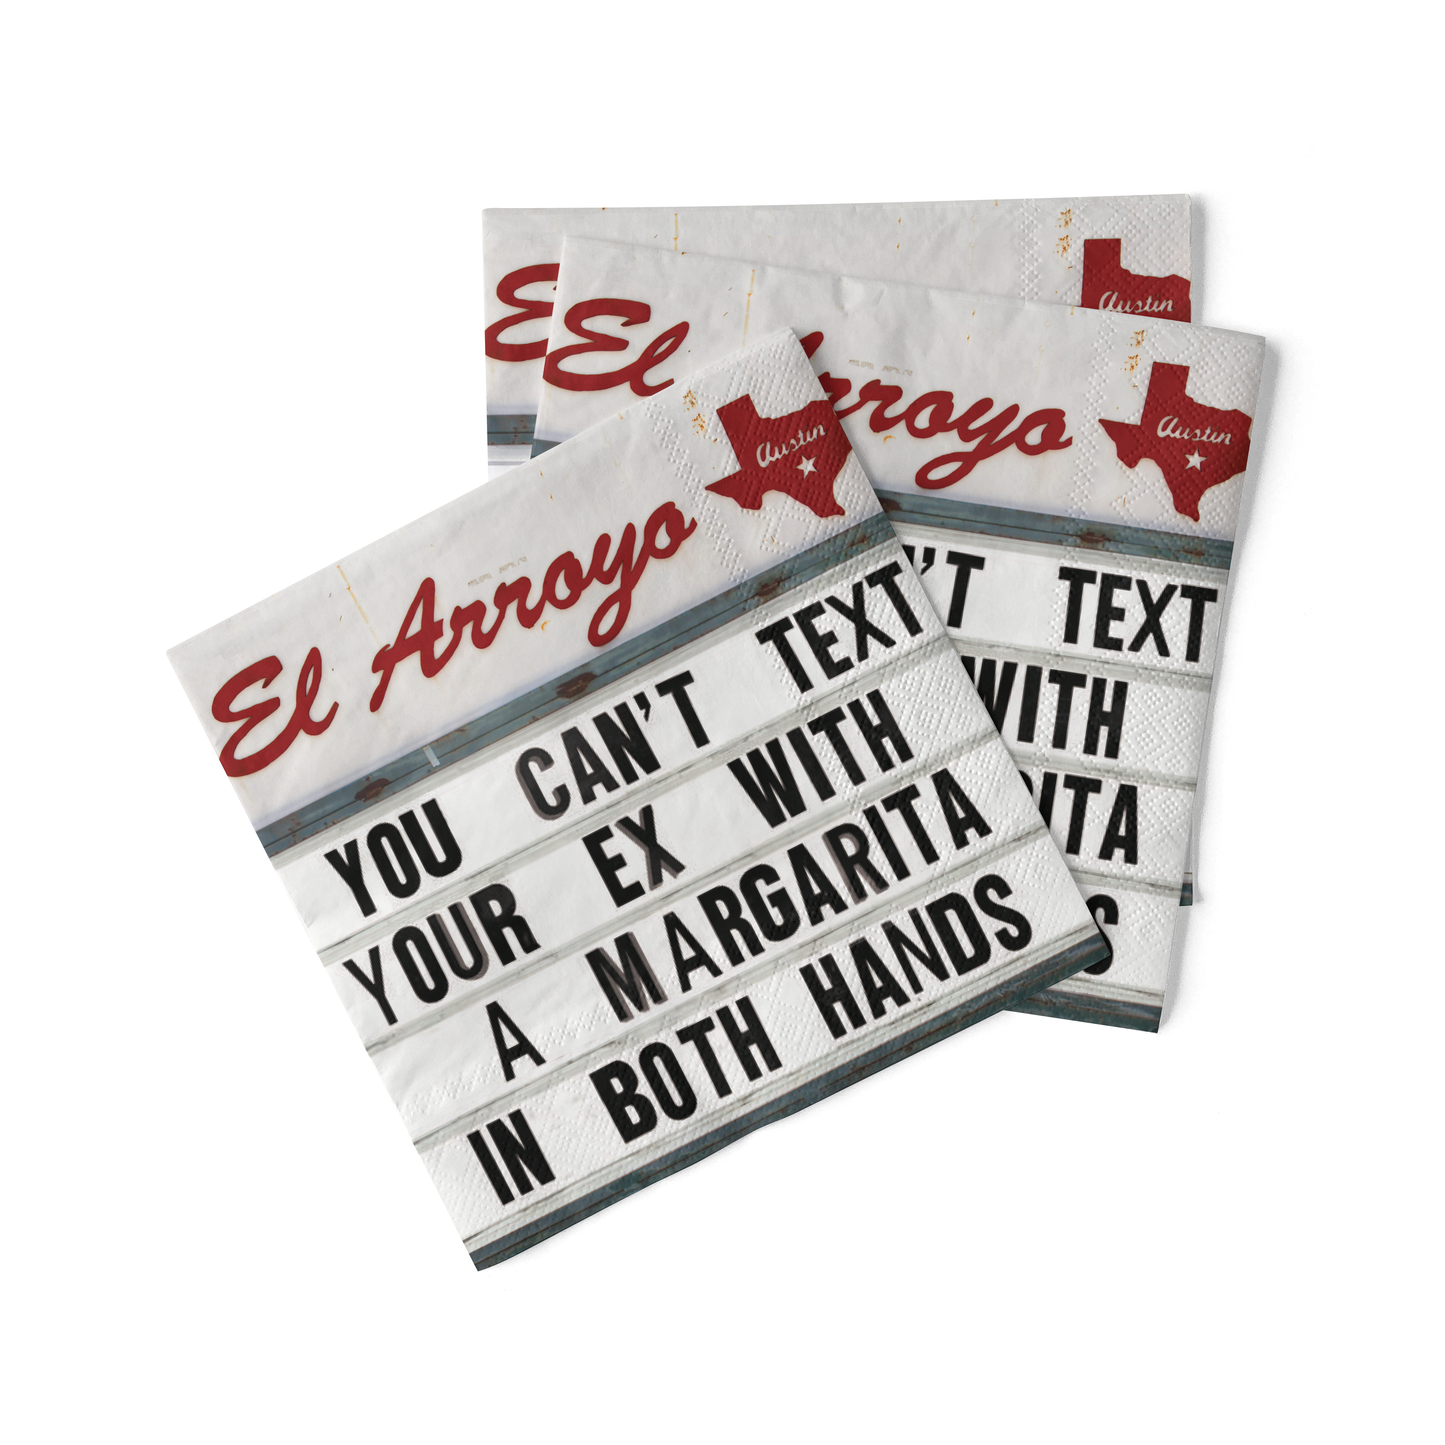 El Arroyo - Cocktail Napkins (Pack of 20) - Can't Text Your Ex